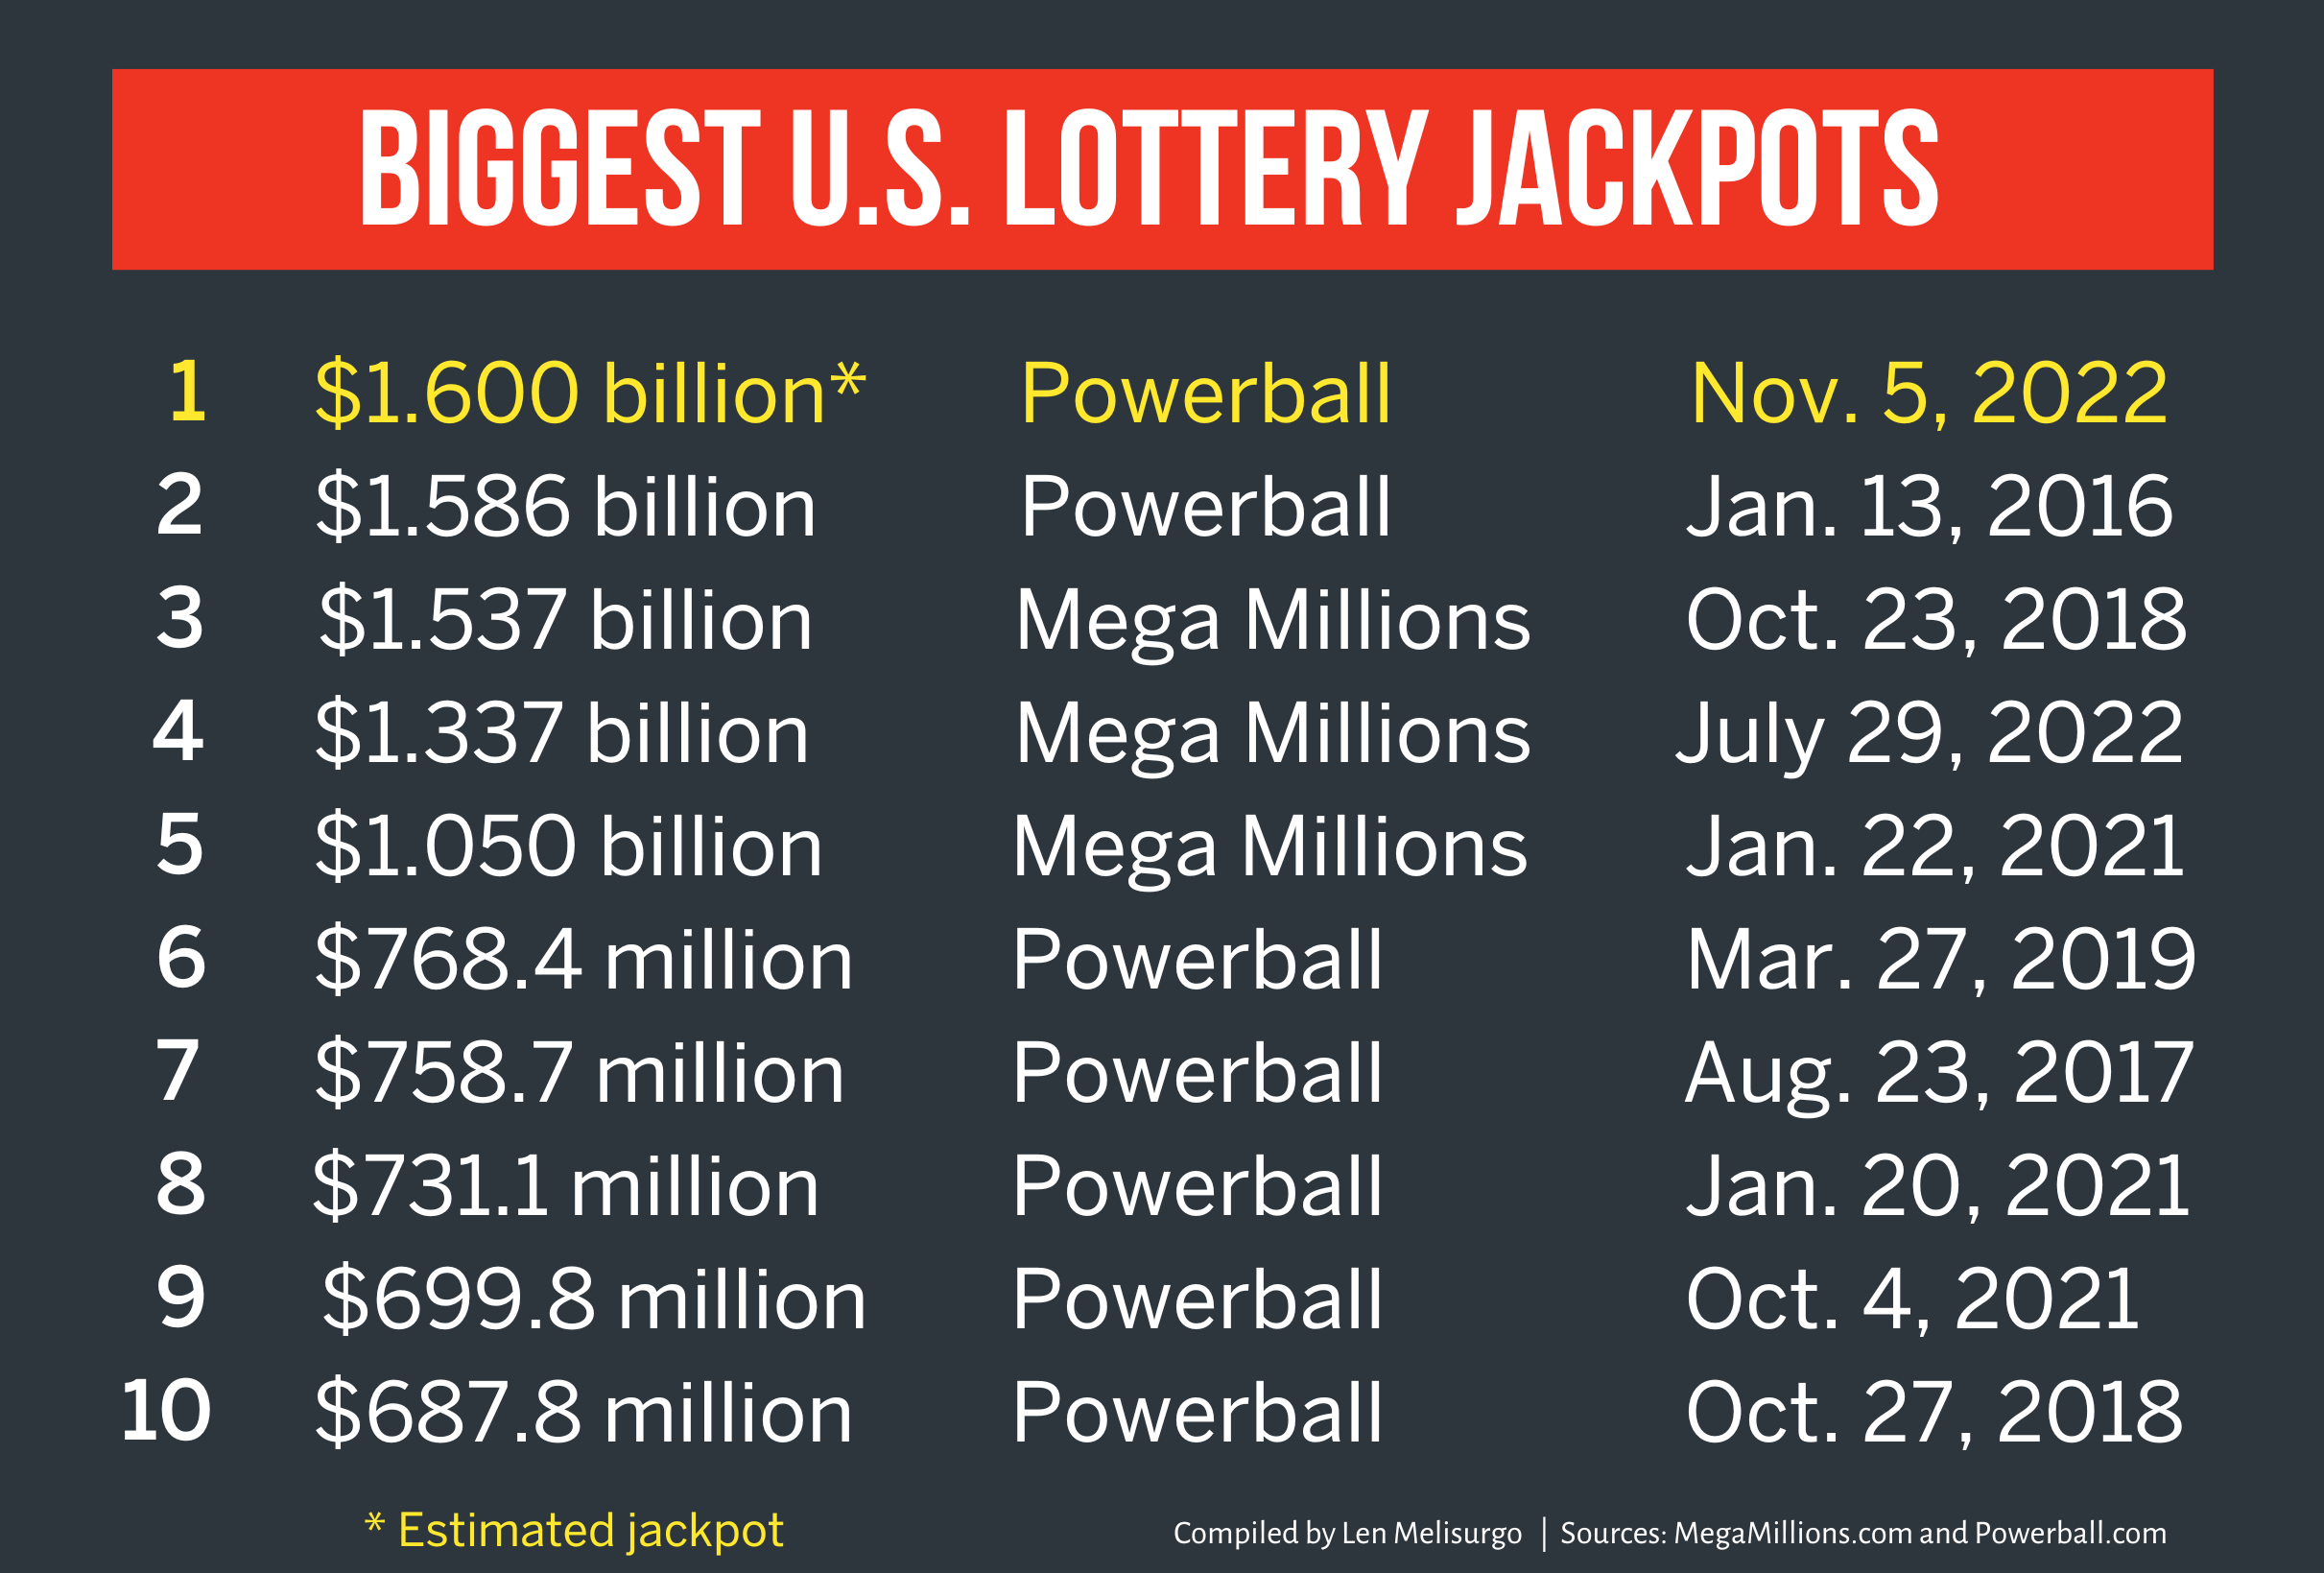 What Happens if You Get the Powerball Number?